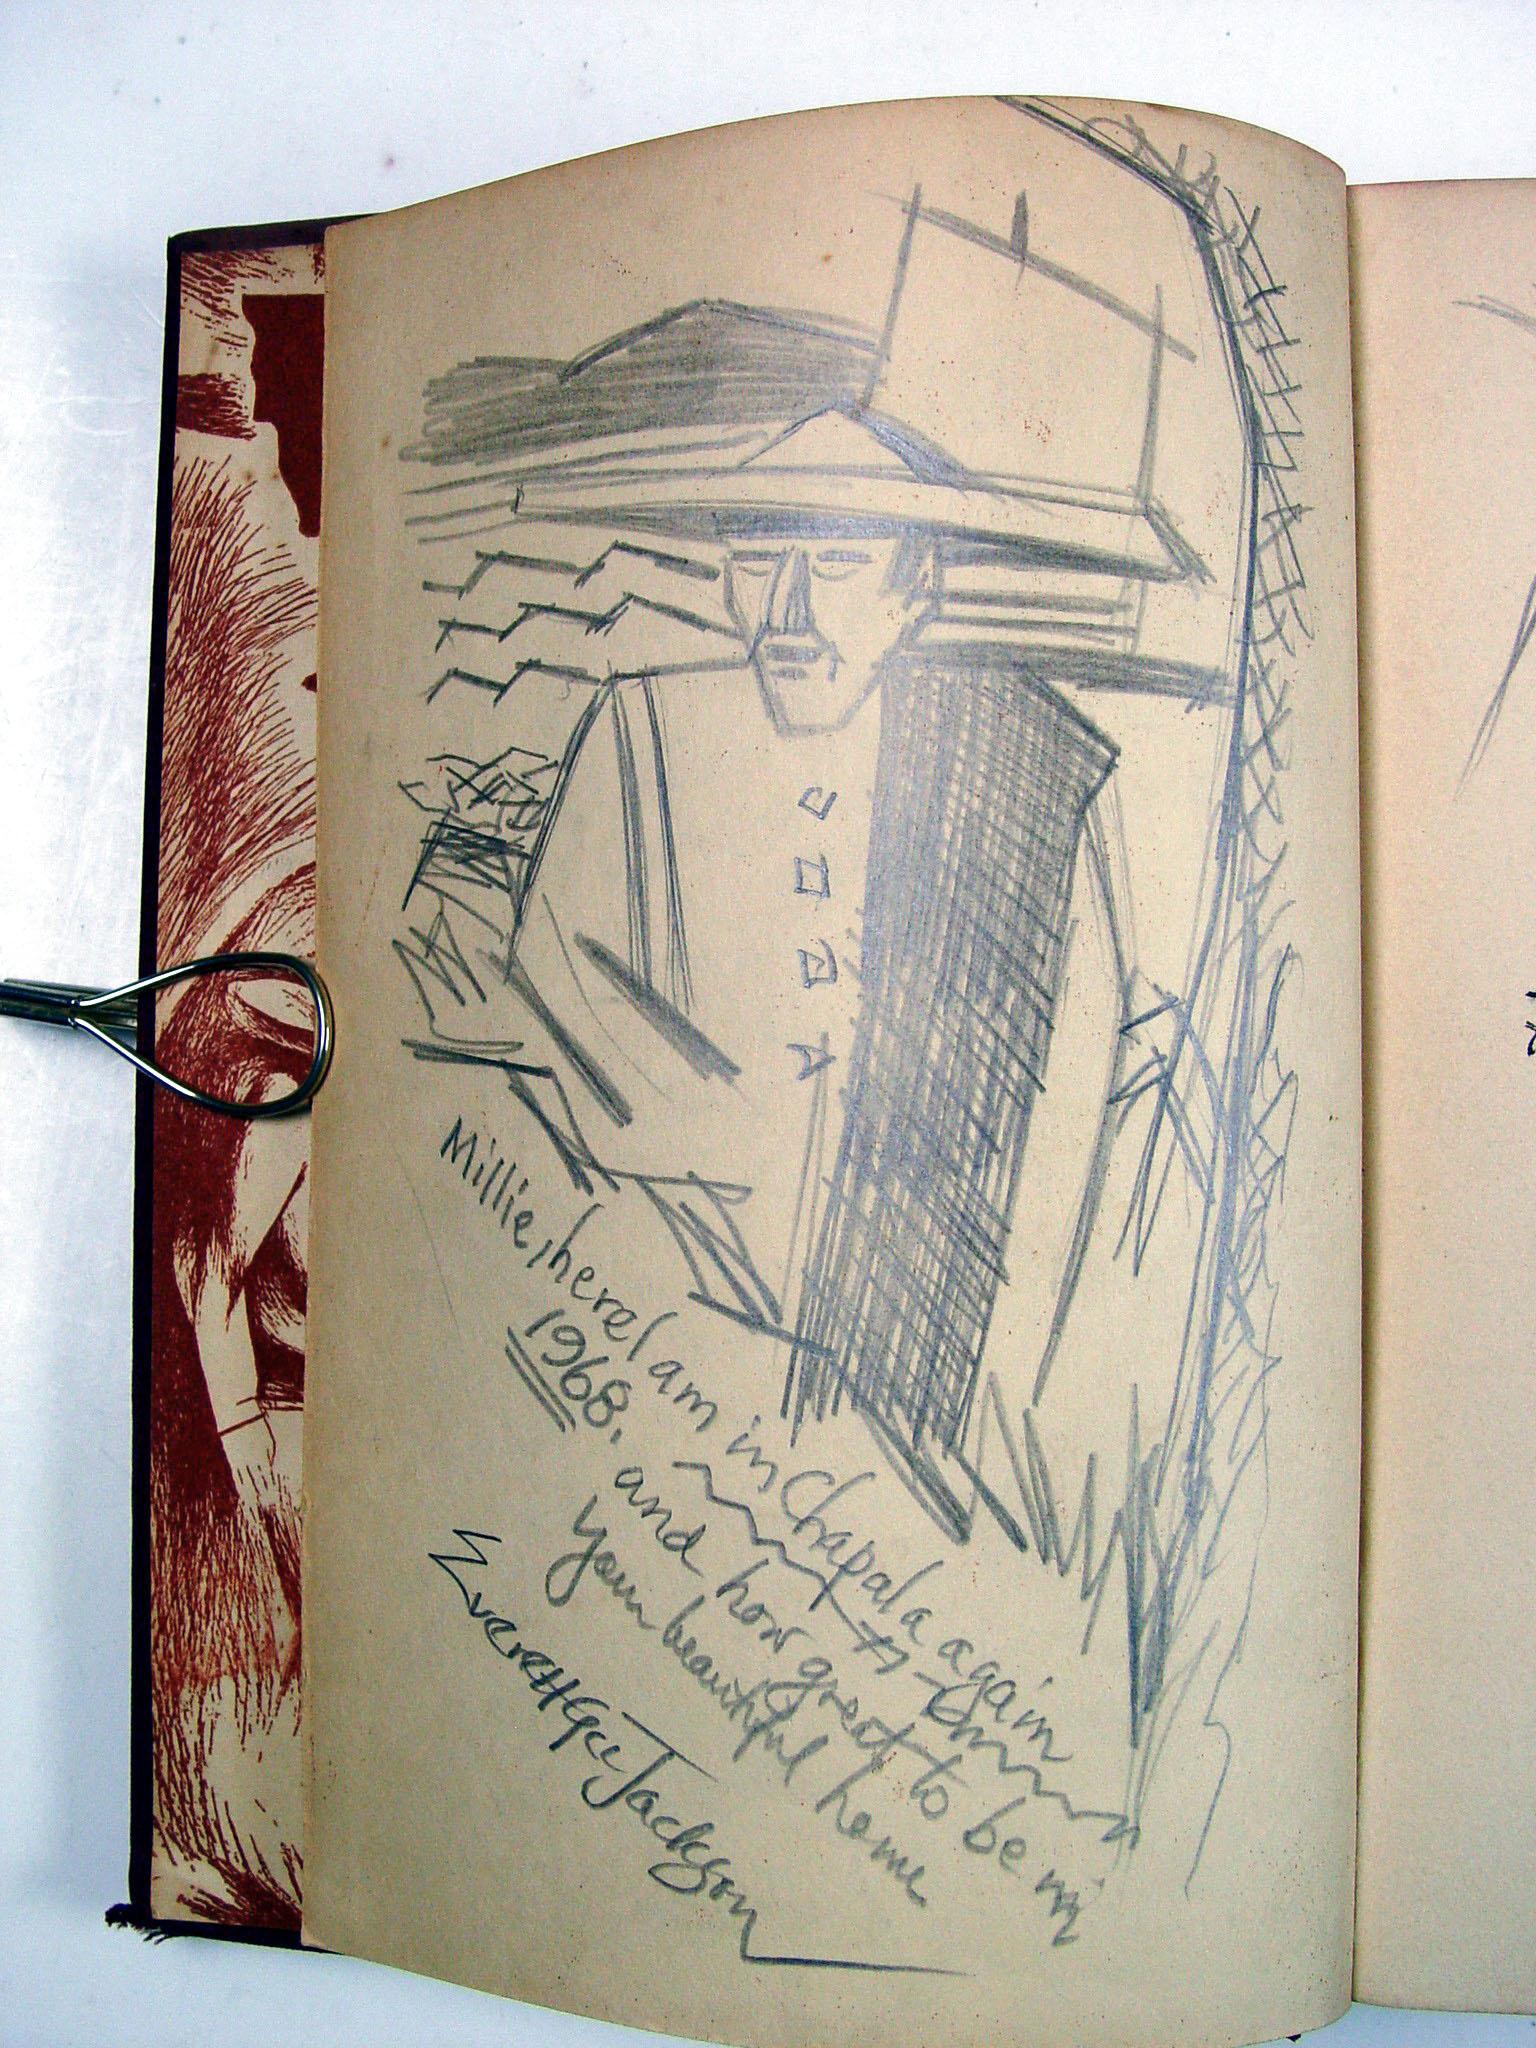 Two original drawings circa 1940's in pencil by Everett Gee Jackson (1900-1995) California in the book Mexico Around Me by Max Miller which he illustrated. Inscribed to Millie and Joe, signed by the artist. Book is red cloth binding, with some